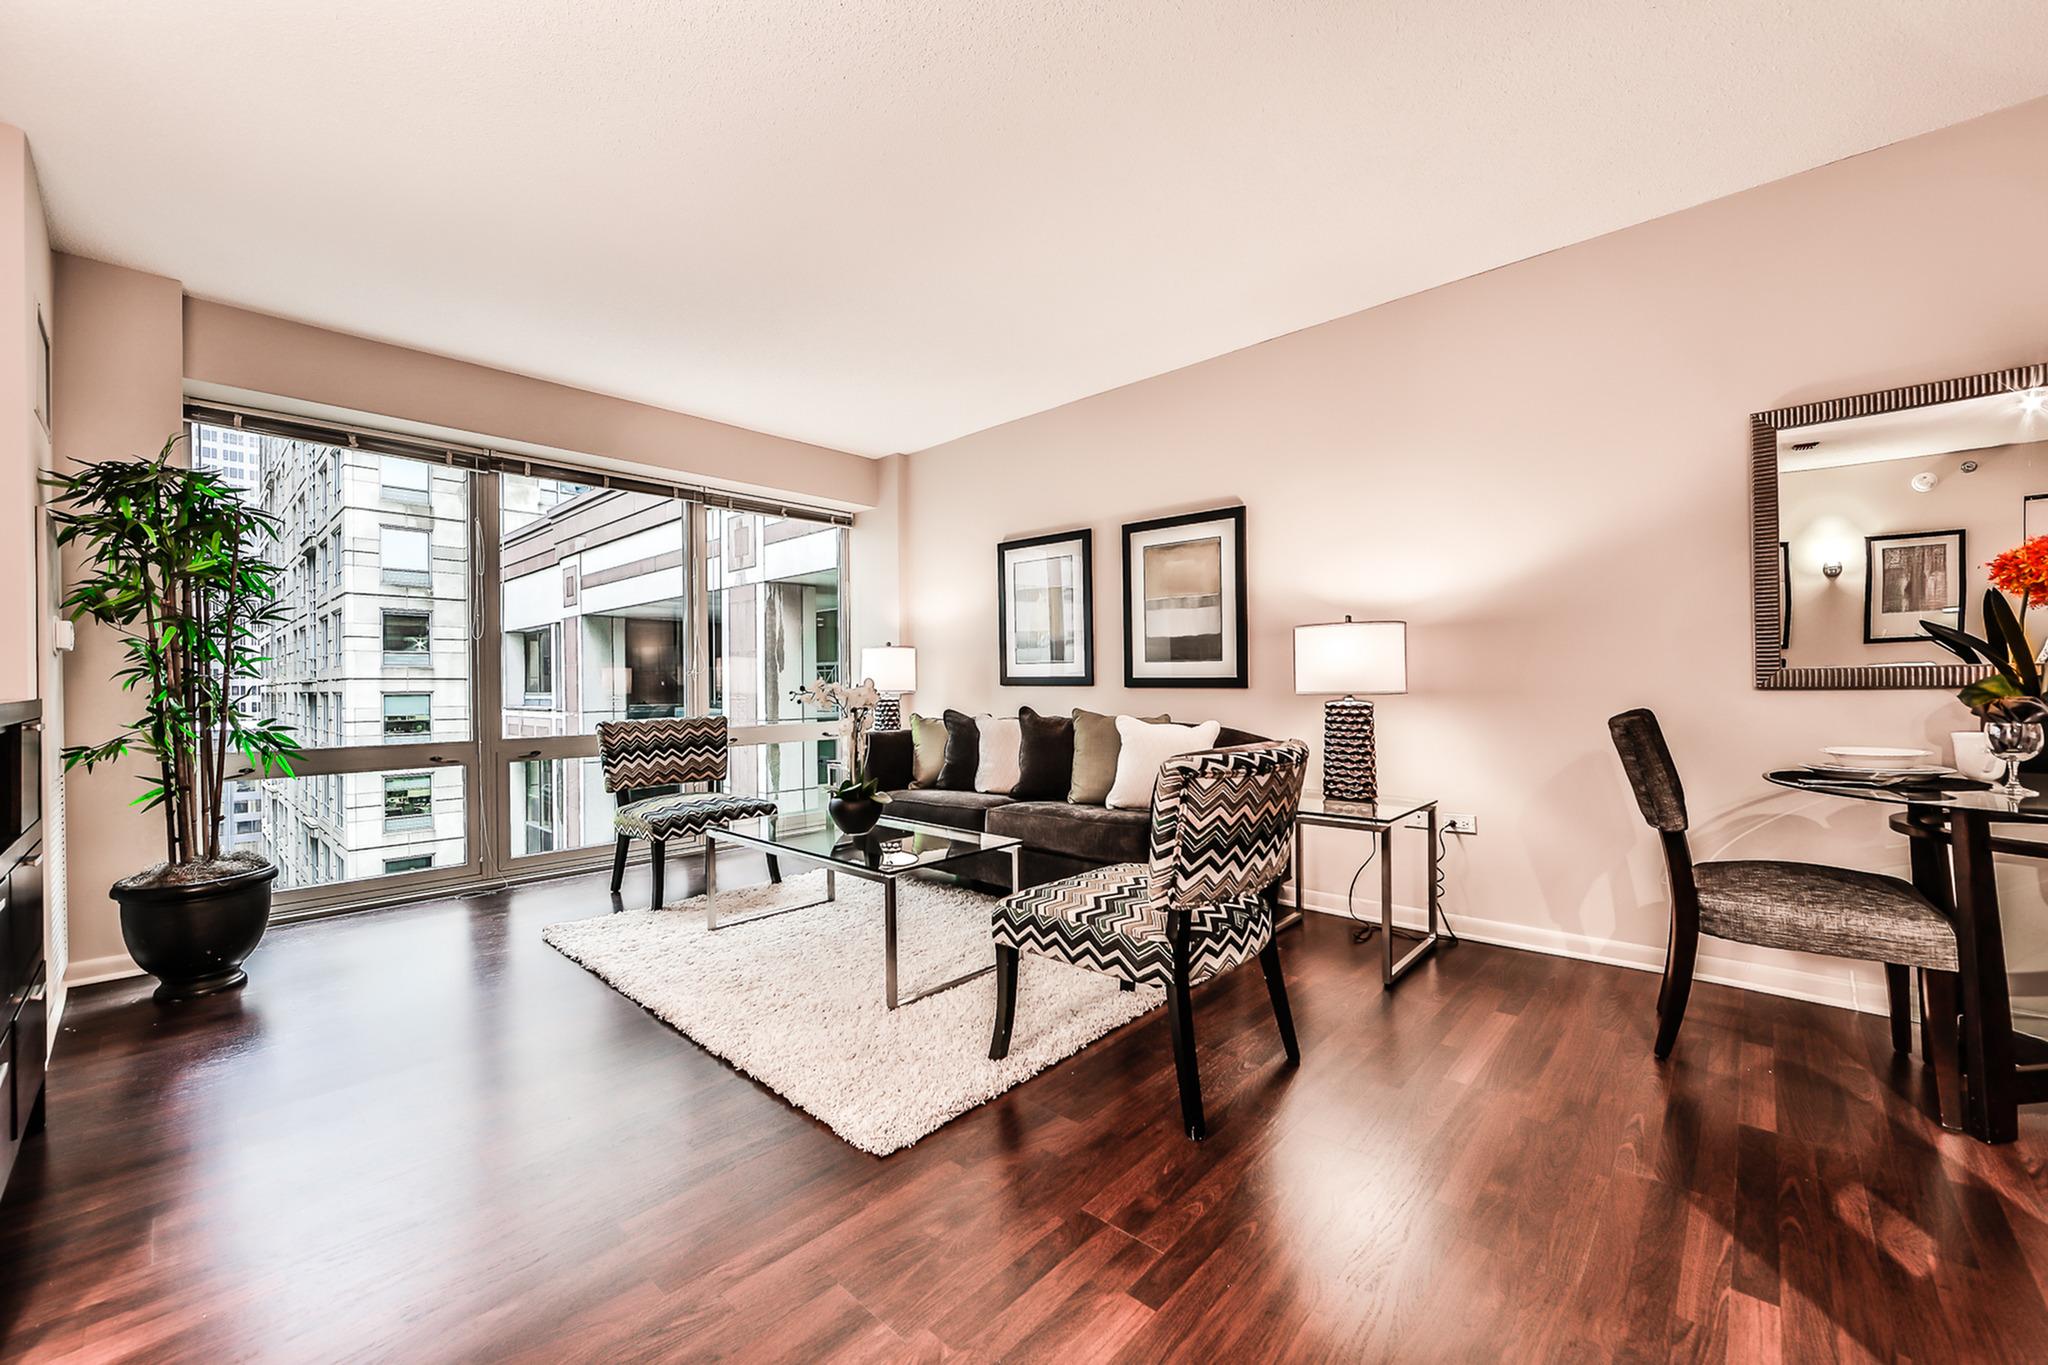 Looking for 2 bedroom apartments for rent near downtown Chicago?